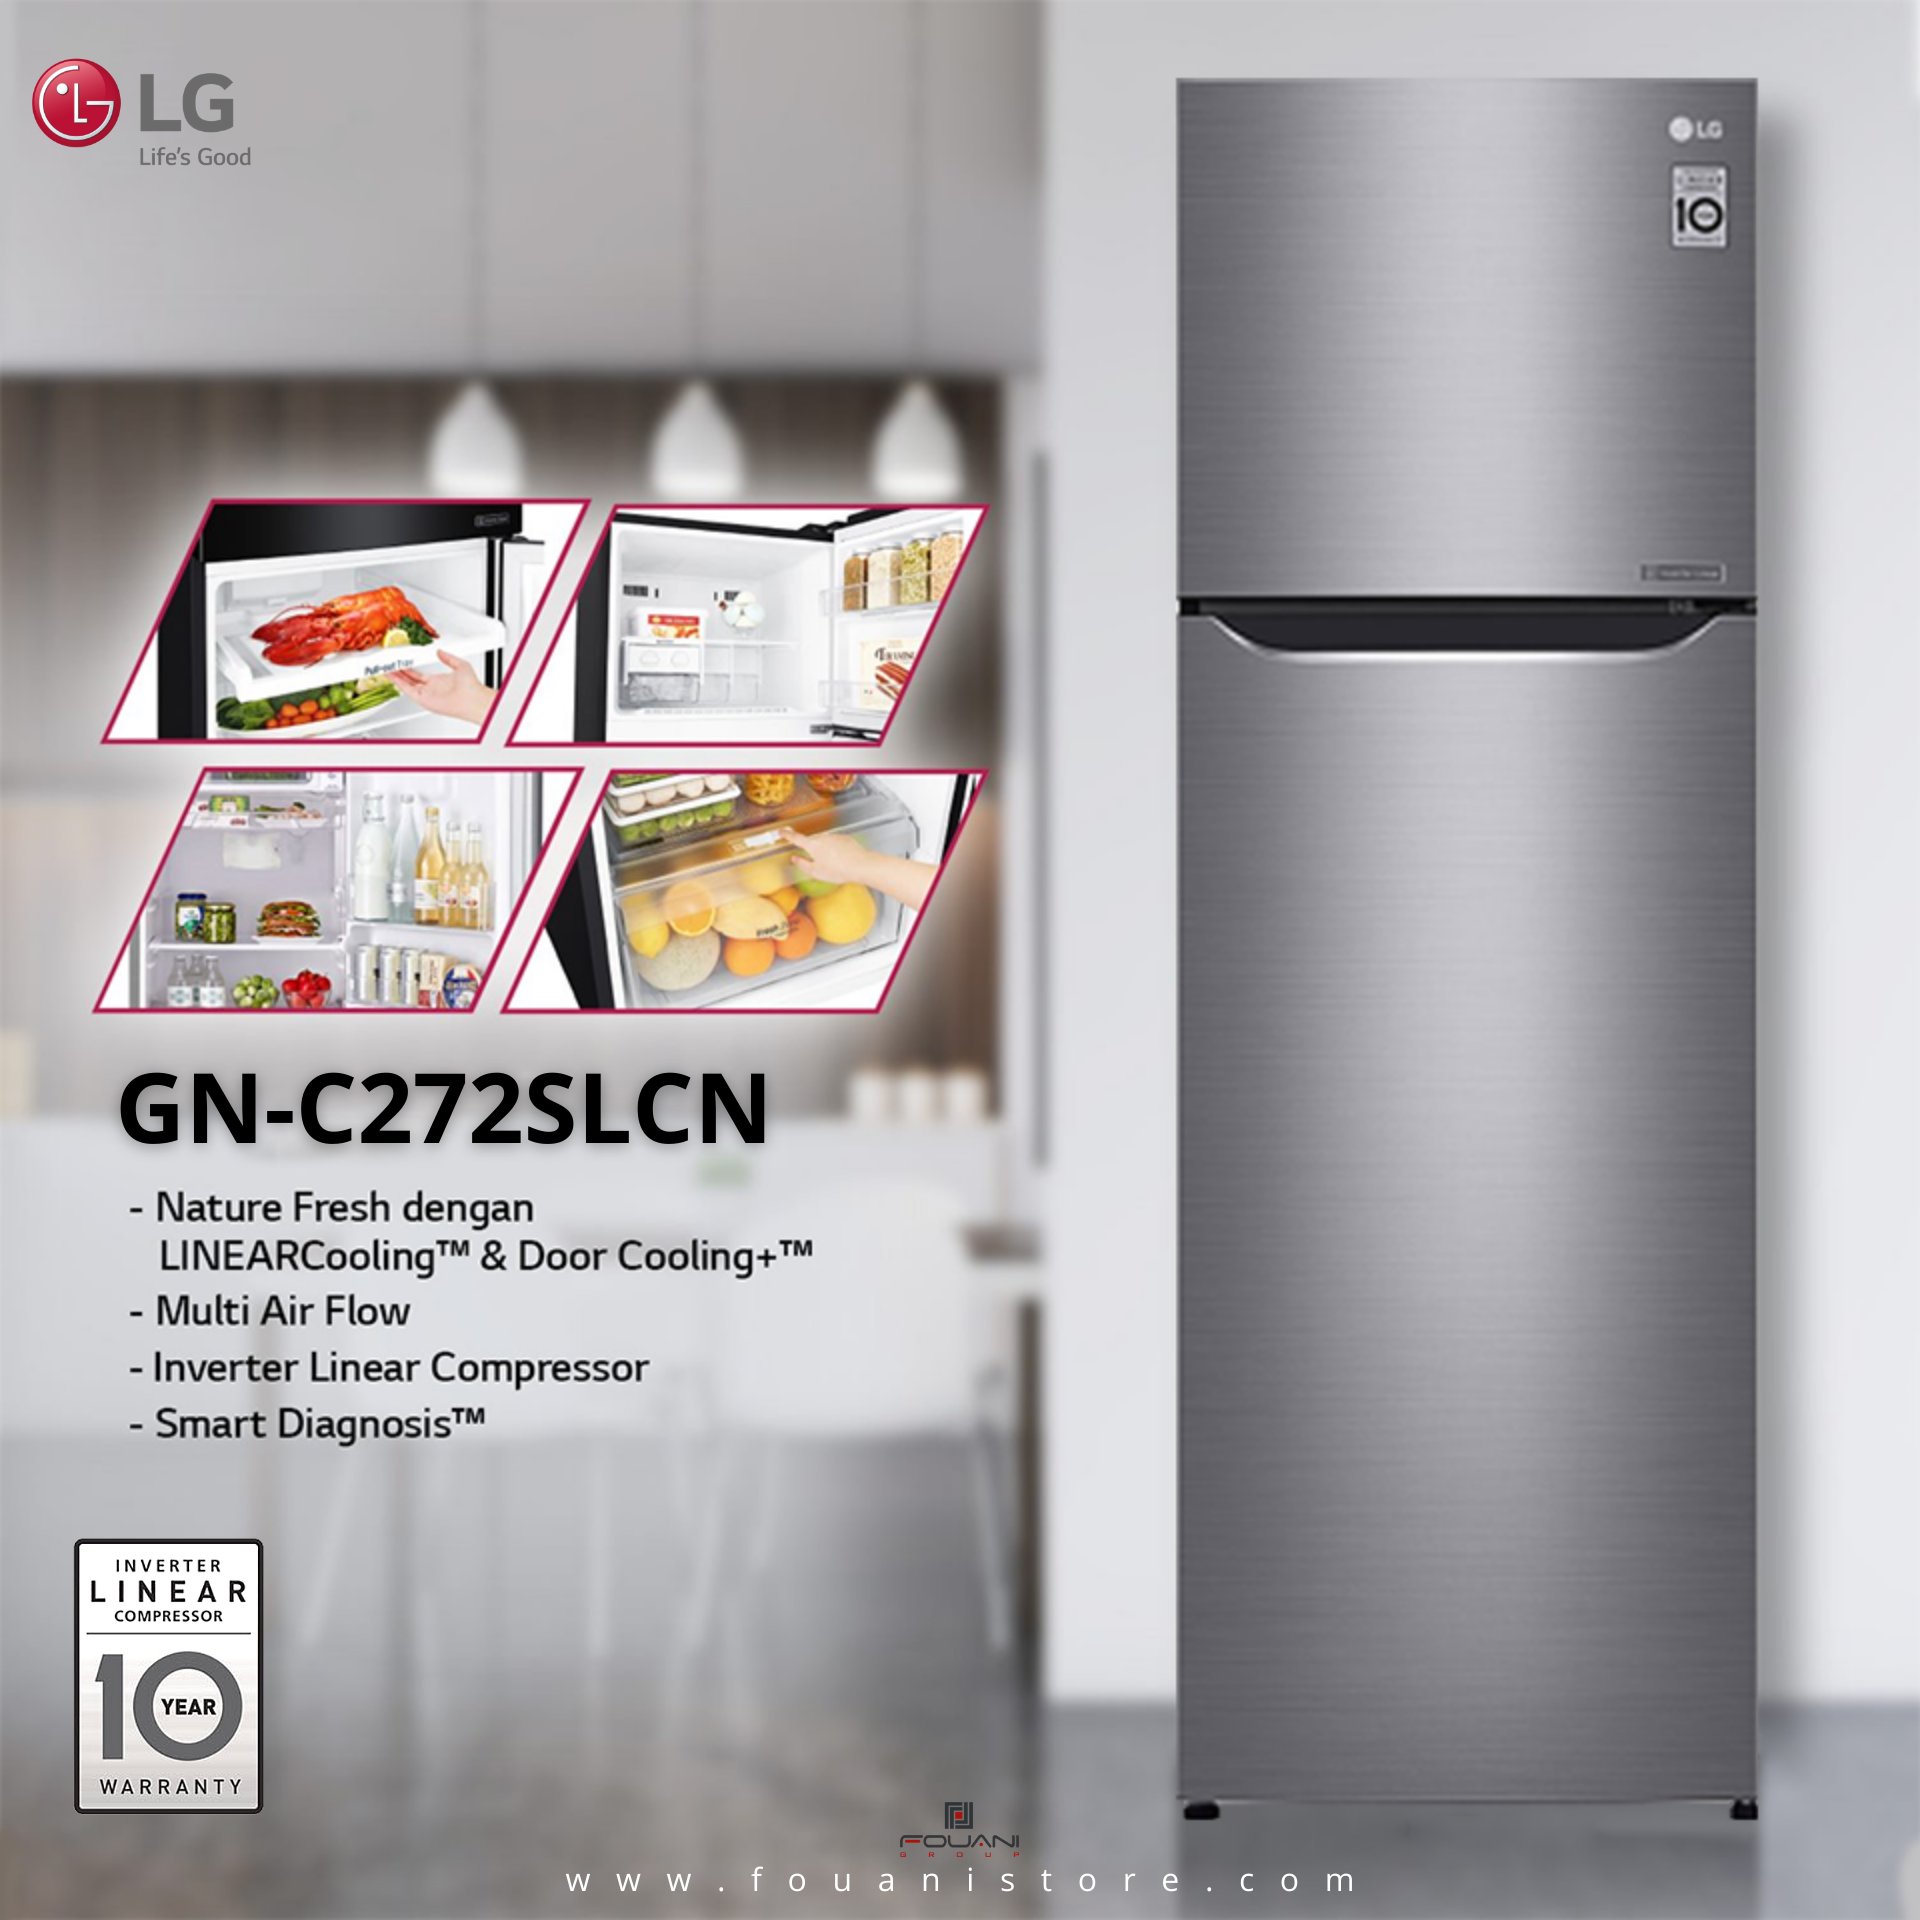 Foran Start reparere Fouani Nig Ltd - LG Electronics on Twitter: "LG Top Freezer GN-C272SLCN  Refrigerator keeps your food fresher longer with #LINEARCooling and  #DoorCooling which makes the inside temperature stay cool evenly. For more